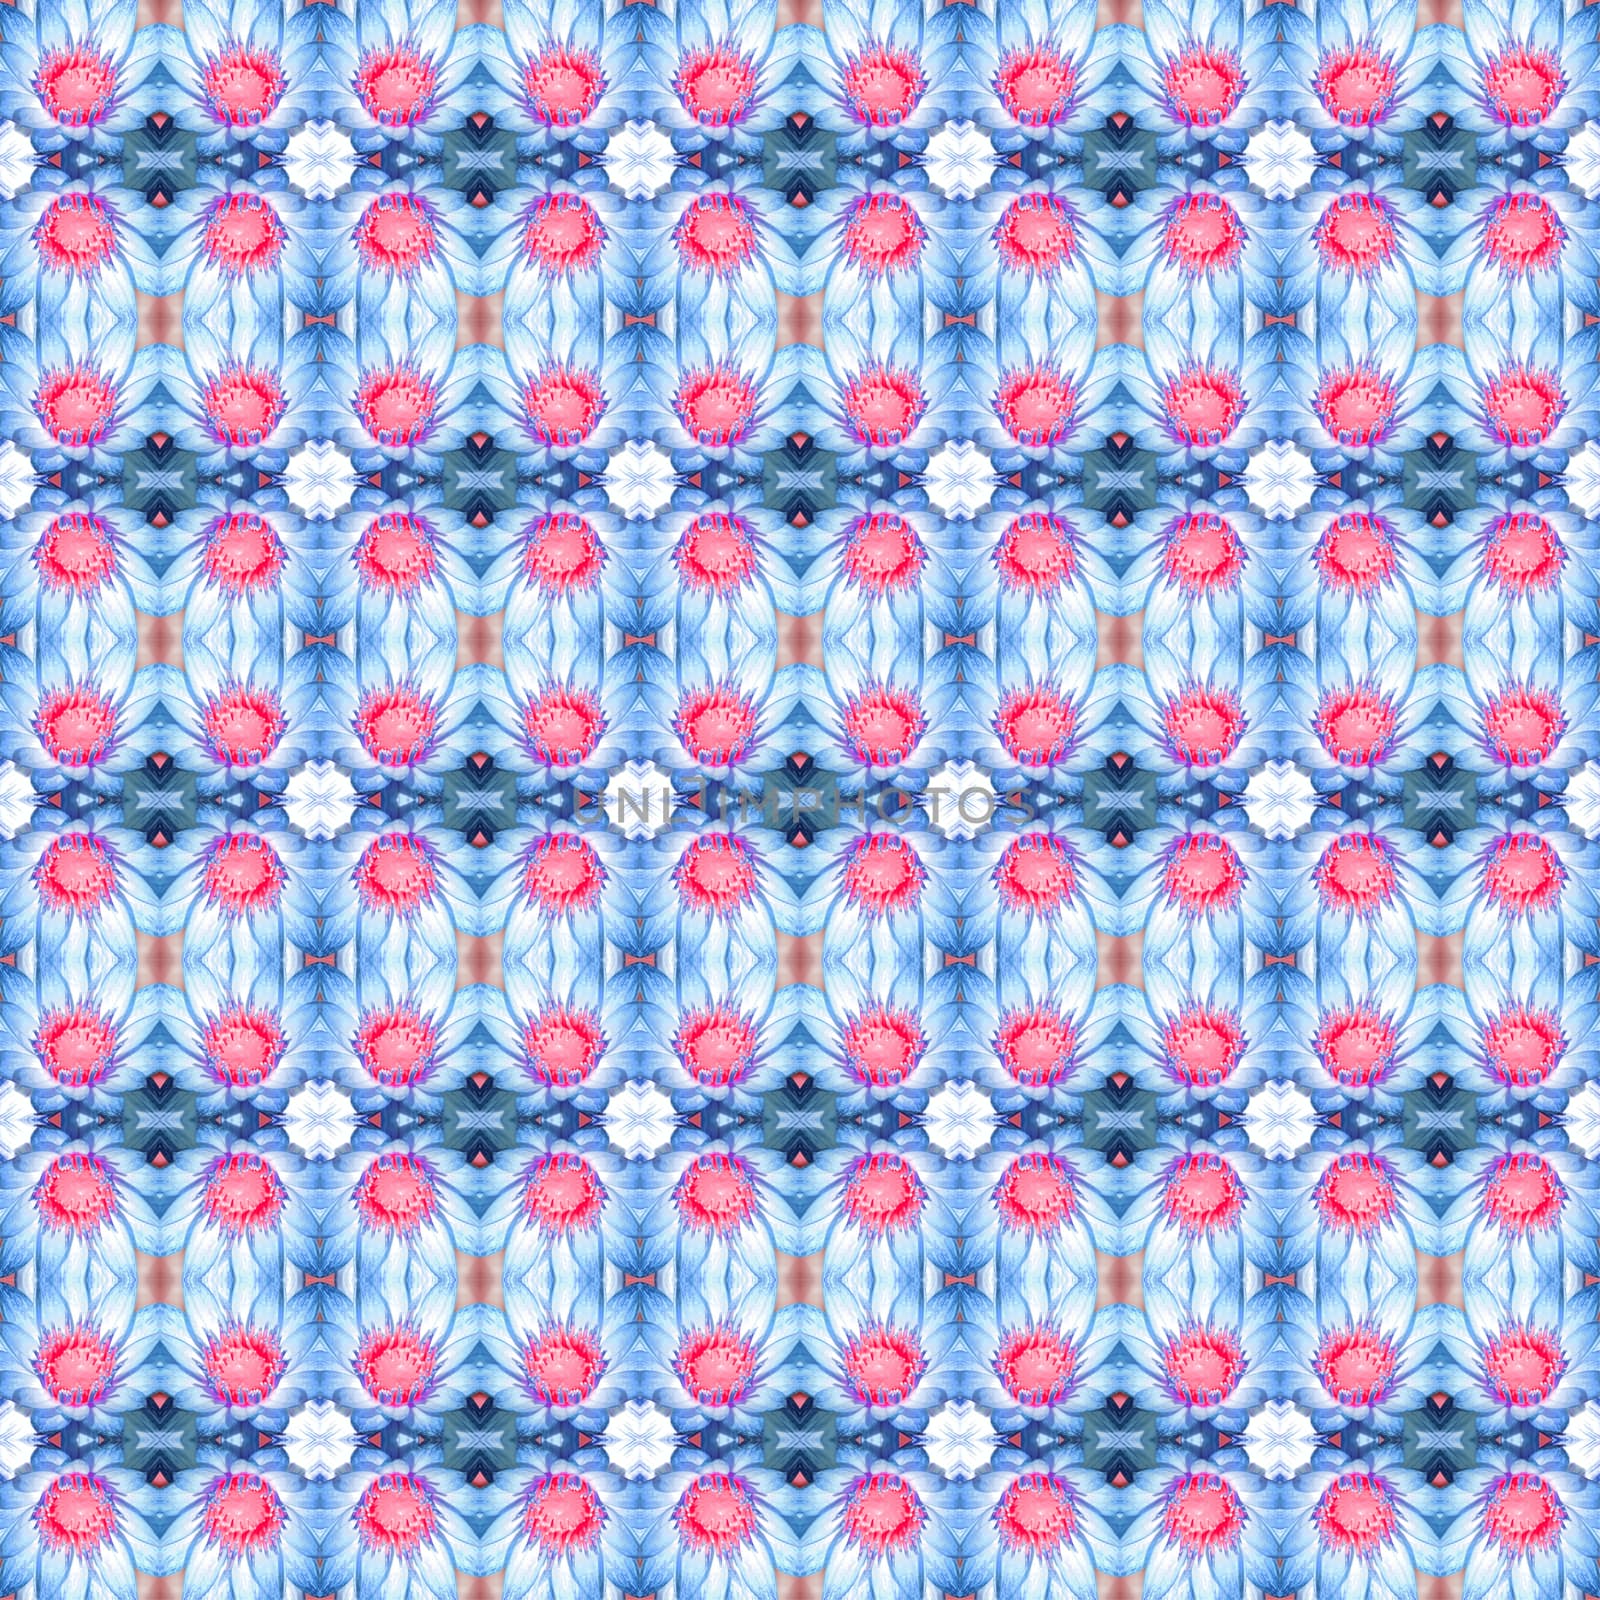 Beautiful blue waterlily or lotus blossom flower in pond seamless use as pattern and wallpaper.